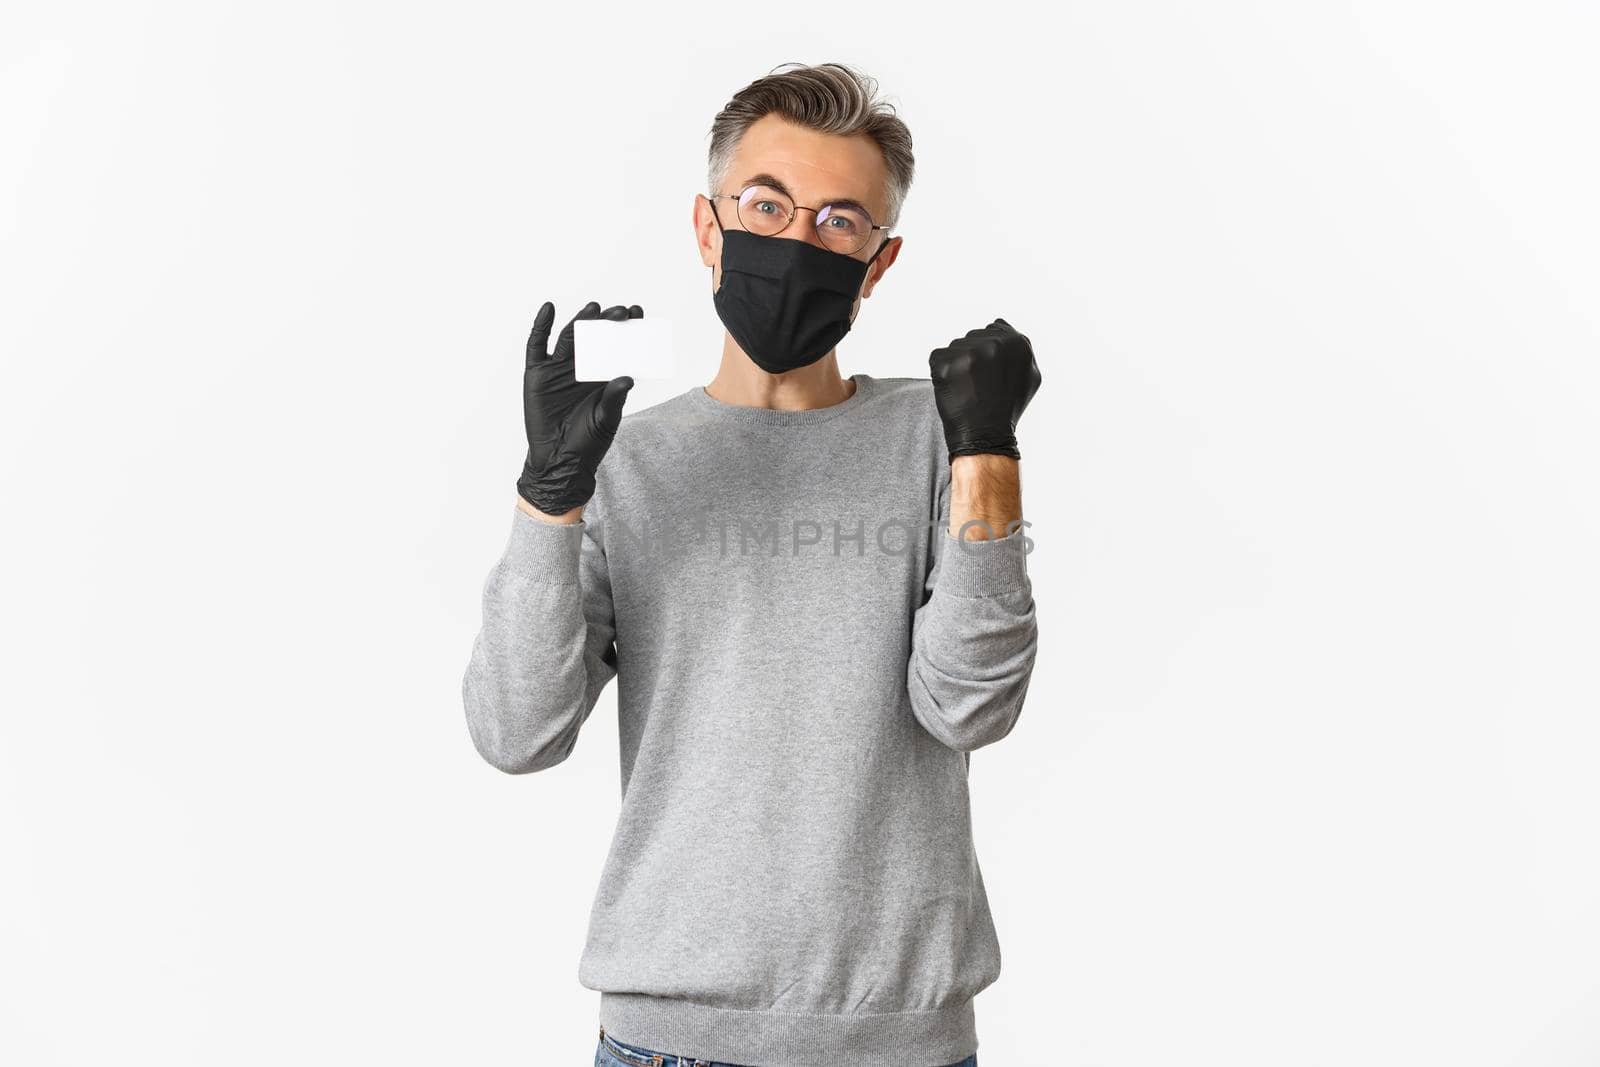 Concept of covid-19, social distancing and lifestyle. Image of attractive middle-aged man in medical mask, gloves and glasses, showing credit card and rejoicing, standing over white background.